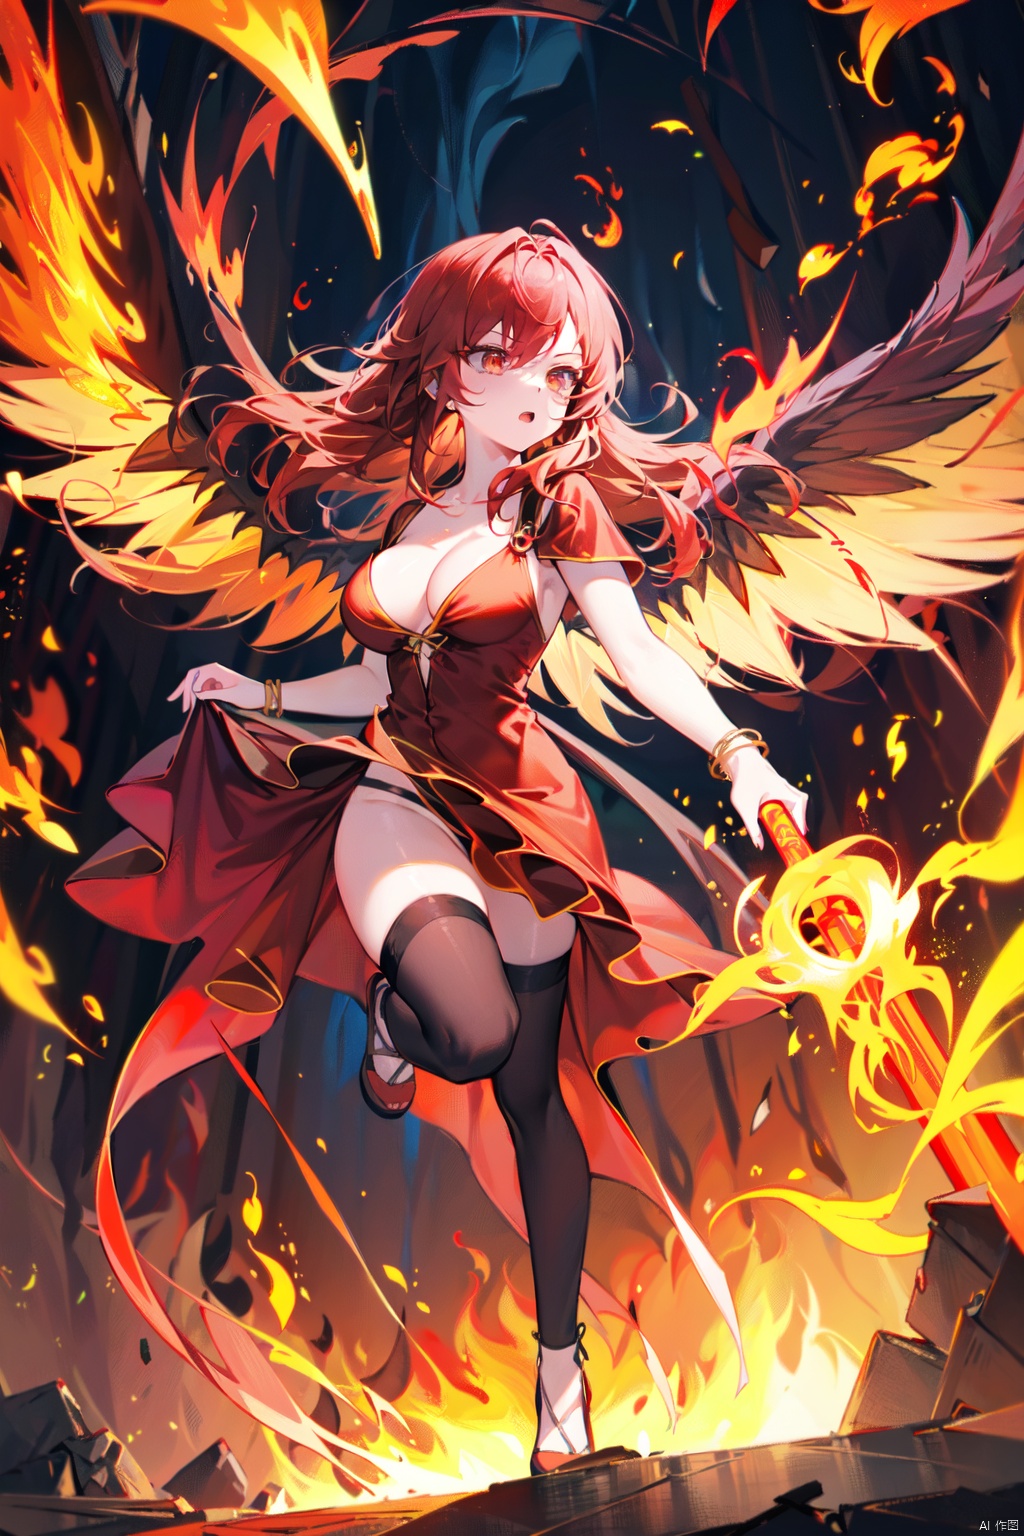 (best quality), (masterpiece), 1girl, bracelet, breasts, breathing_fire, burning, cleavage, dress, explosion, fiery_hair, fiery_wings, fire, flame, flaming_sword, flaming_weapon, full_body, jewelry, long_hair, magic, molten_rock, open_mouth, orange_eyes, phoenix, pyrokinesis, red_dress, red_eyes, red_hair, tail-tip_fire, thighhighs, torch, white_legwear
